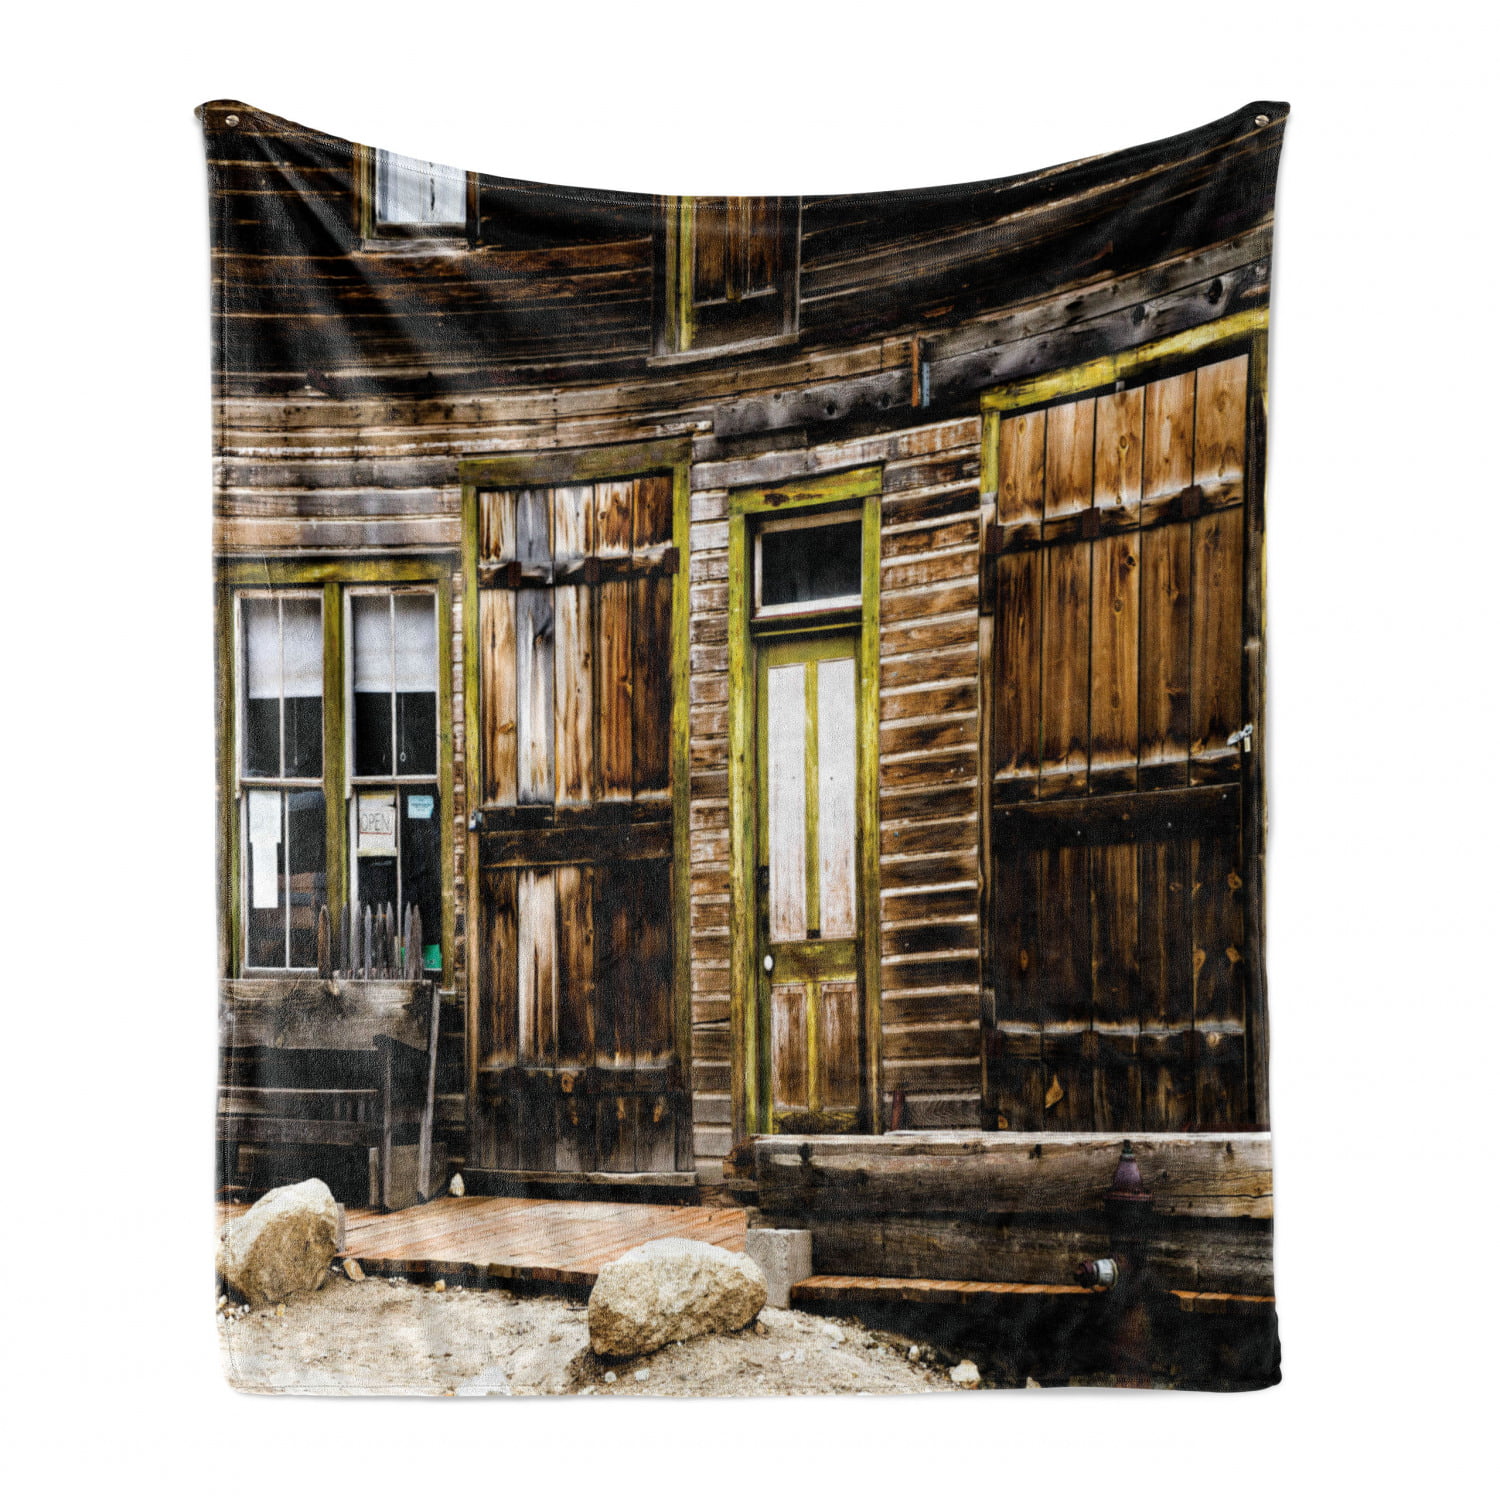 Brown Ambesonne Rustic Soft Flannel Fleece Throw Blanket Old Wooden Plank House with Antique Door and Windows with Stones on Rocky Street 60 x 80 Cozy Plush for Indoor and Outdoor Use 